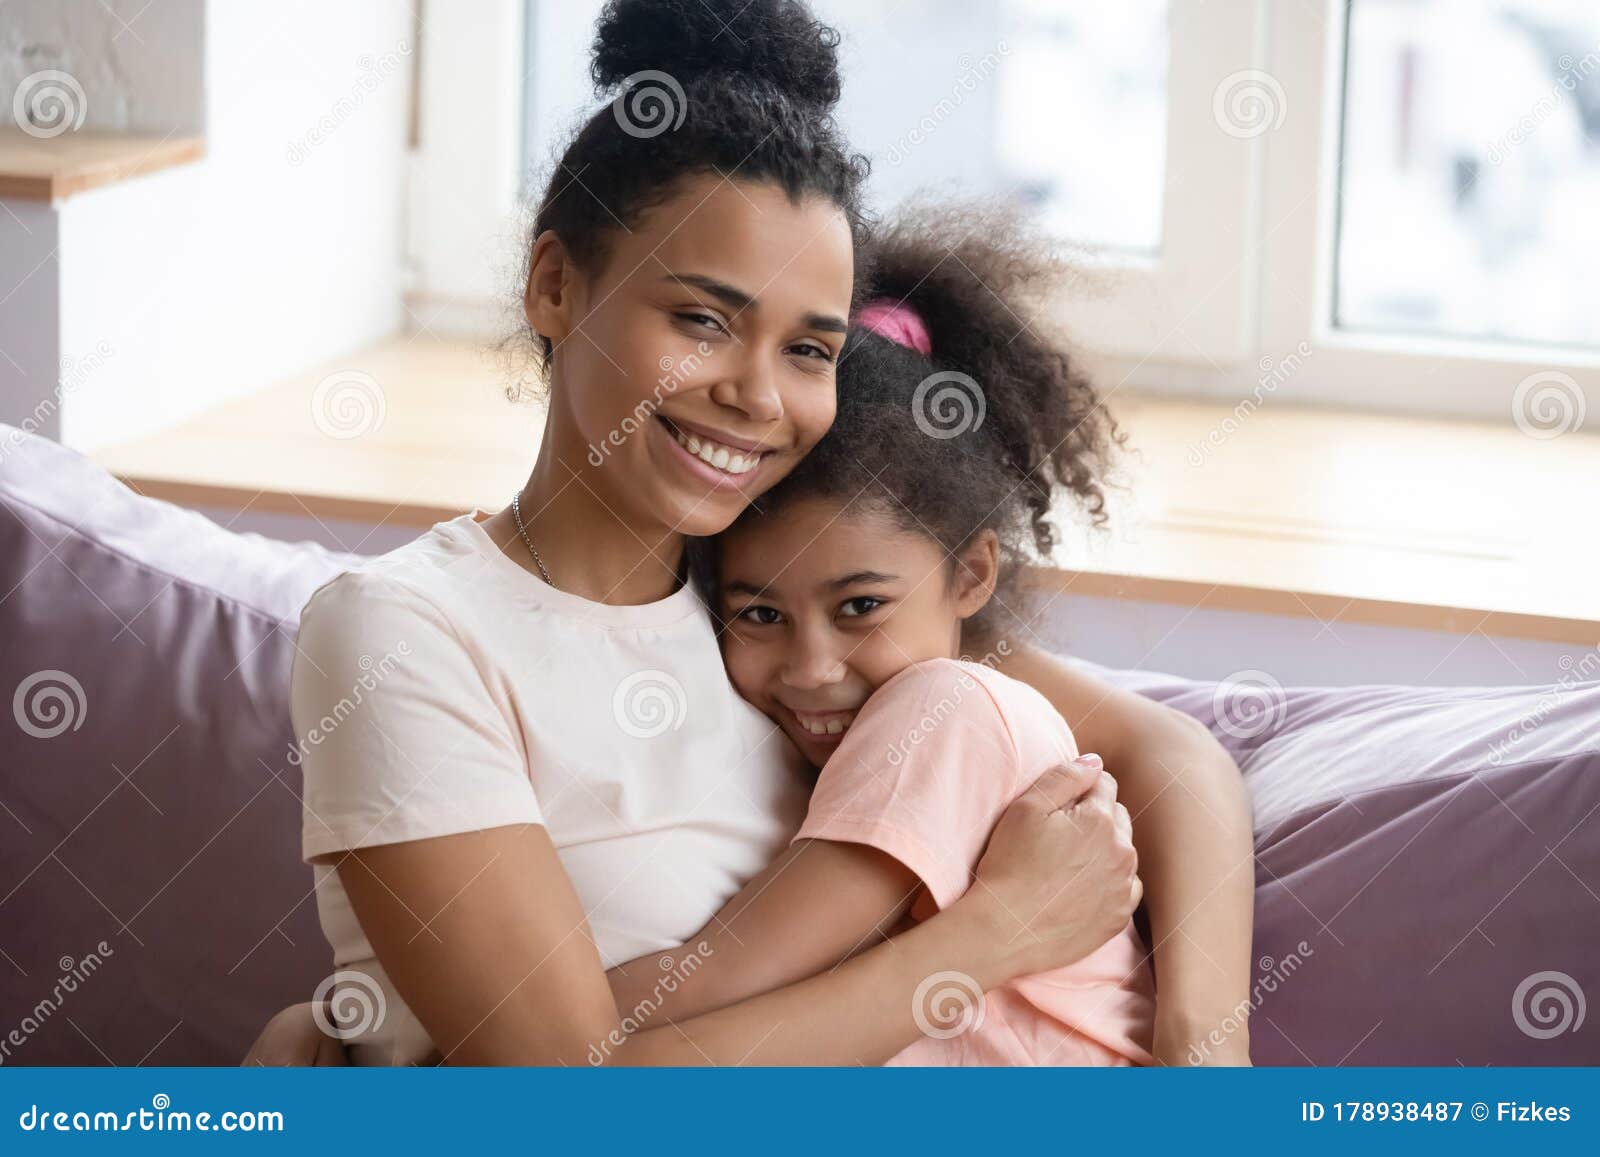 Close Up Headshot Portrait Of African American Mother And Daughter 